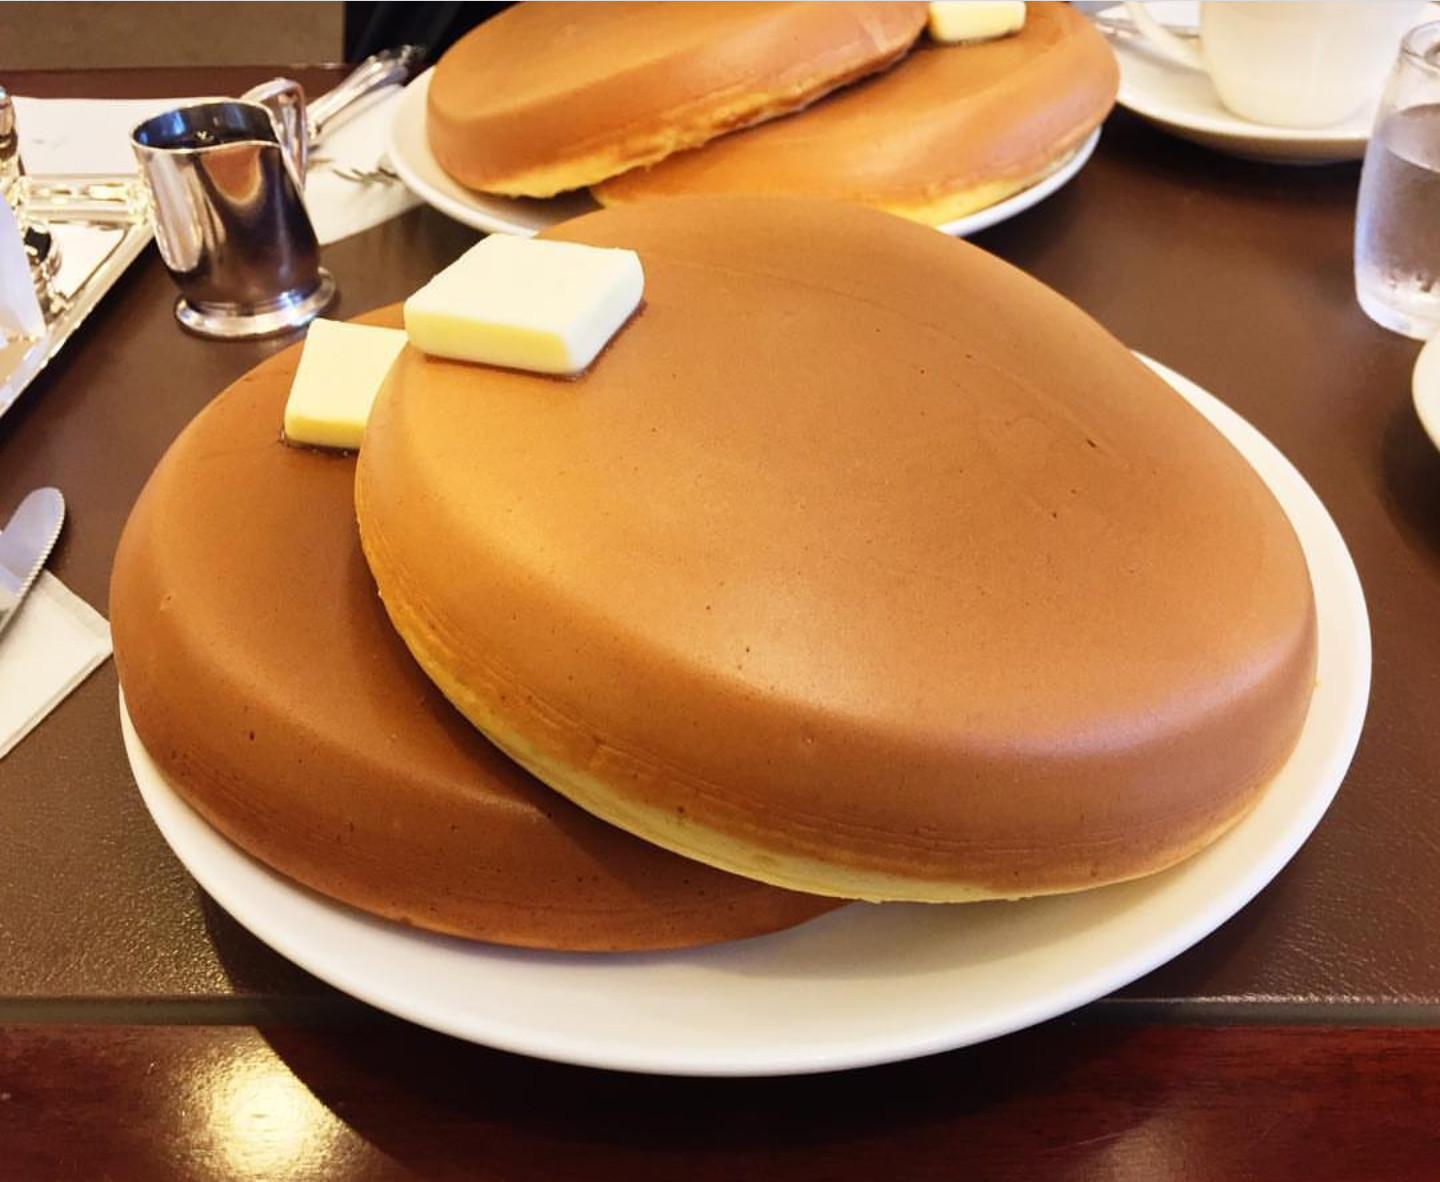 Rice Cooker Pancakes
 Where can I find "Japanese" rice cooker pancakes in NYC